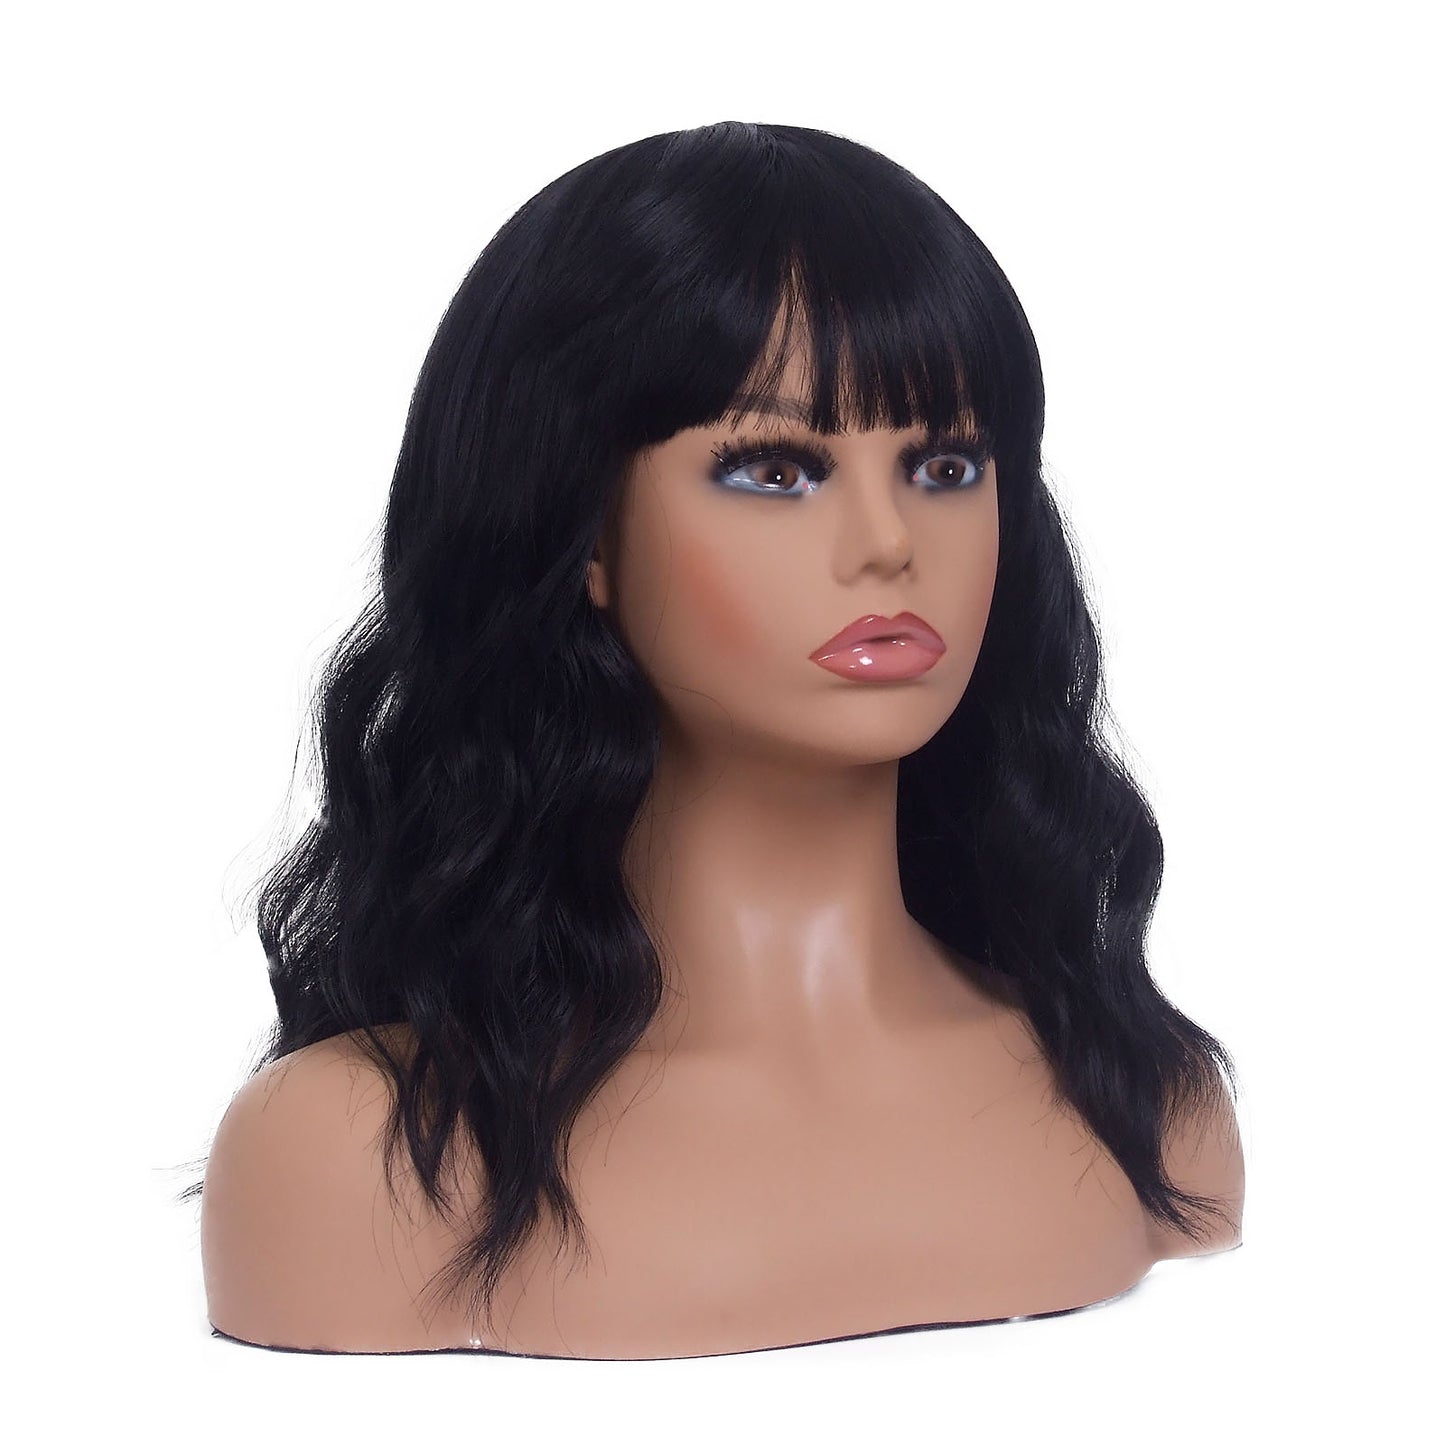 LINGDORA Black Short Curly Wigs Synthetic Hair